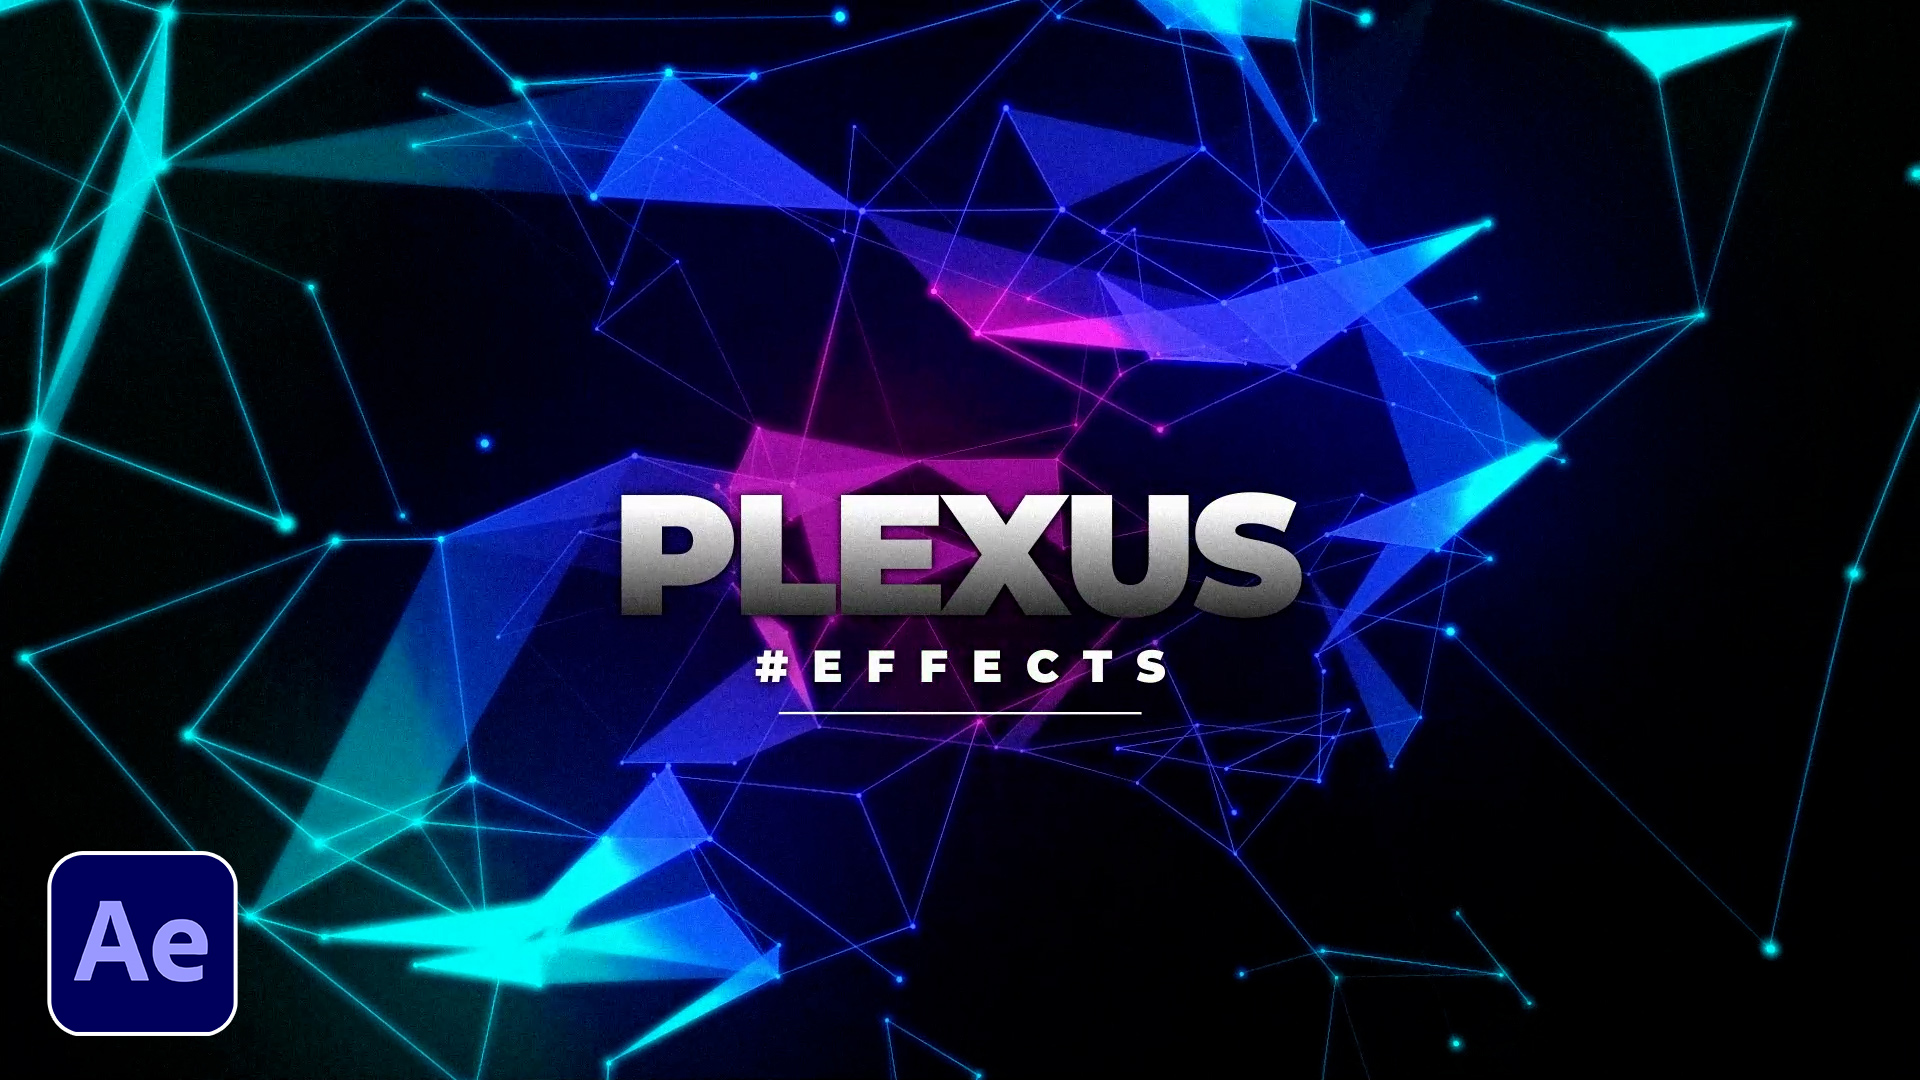 plexus after effects cc 2019 free download